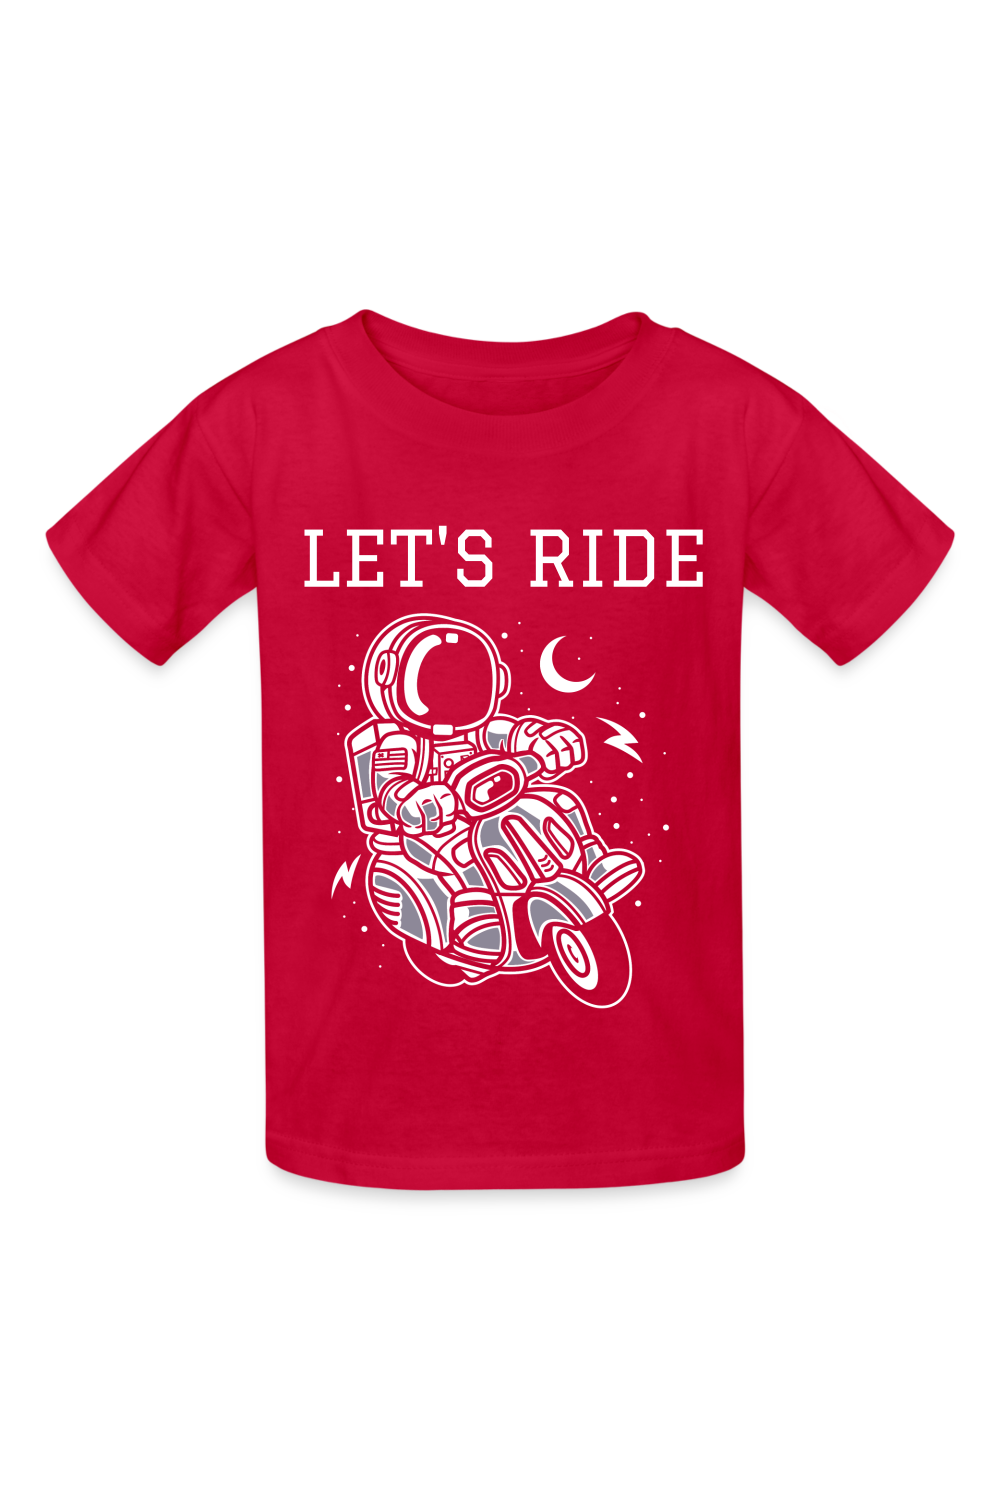 Boys Motorcycle Astronaut Let's Ride Short Sleeve T-Shirt - red - NicholesGifts.online